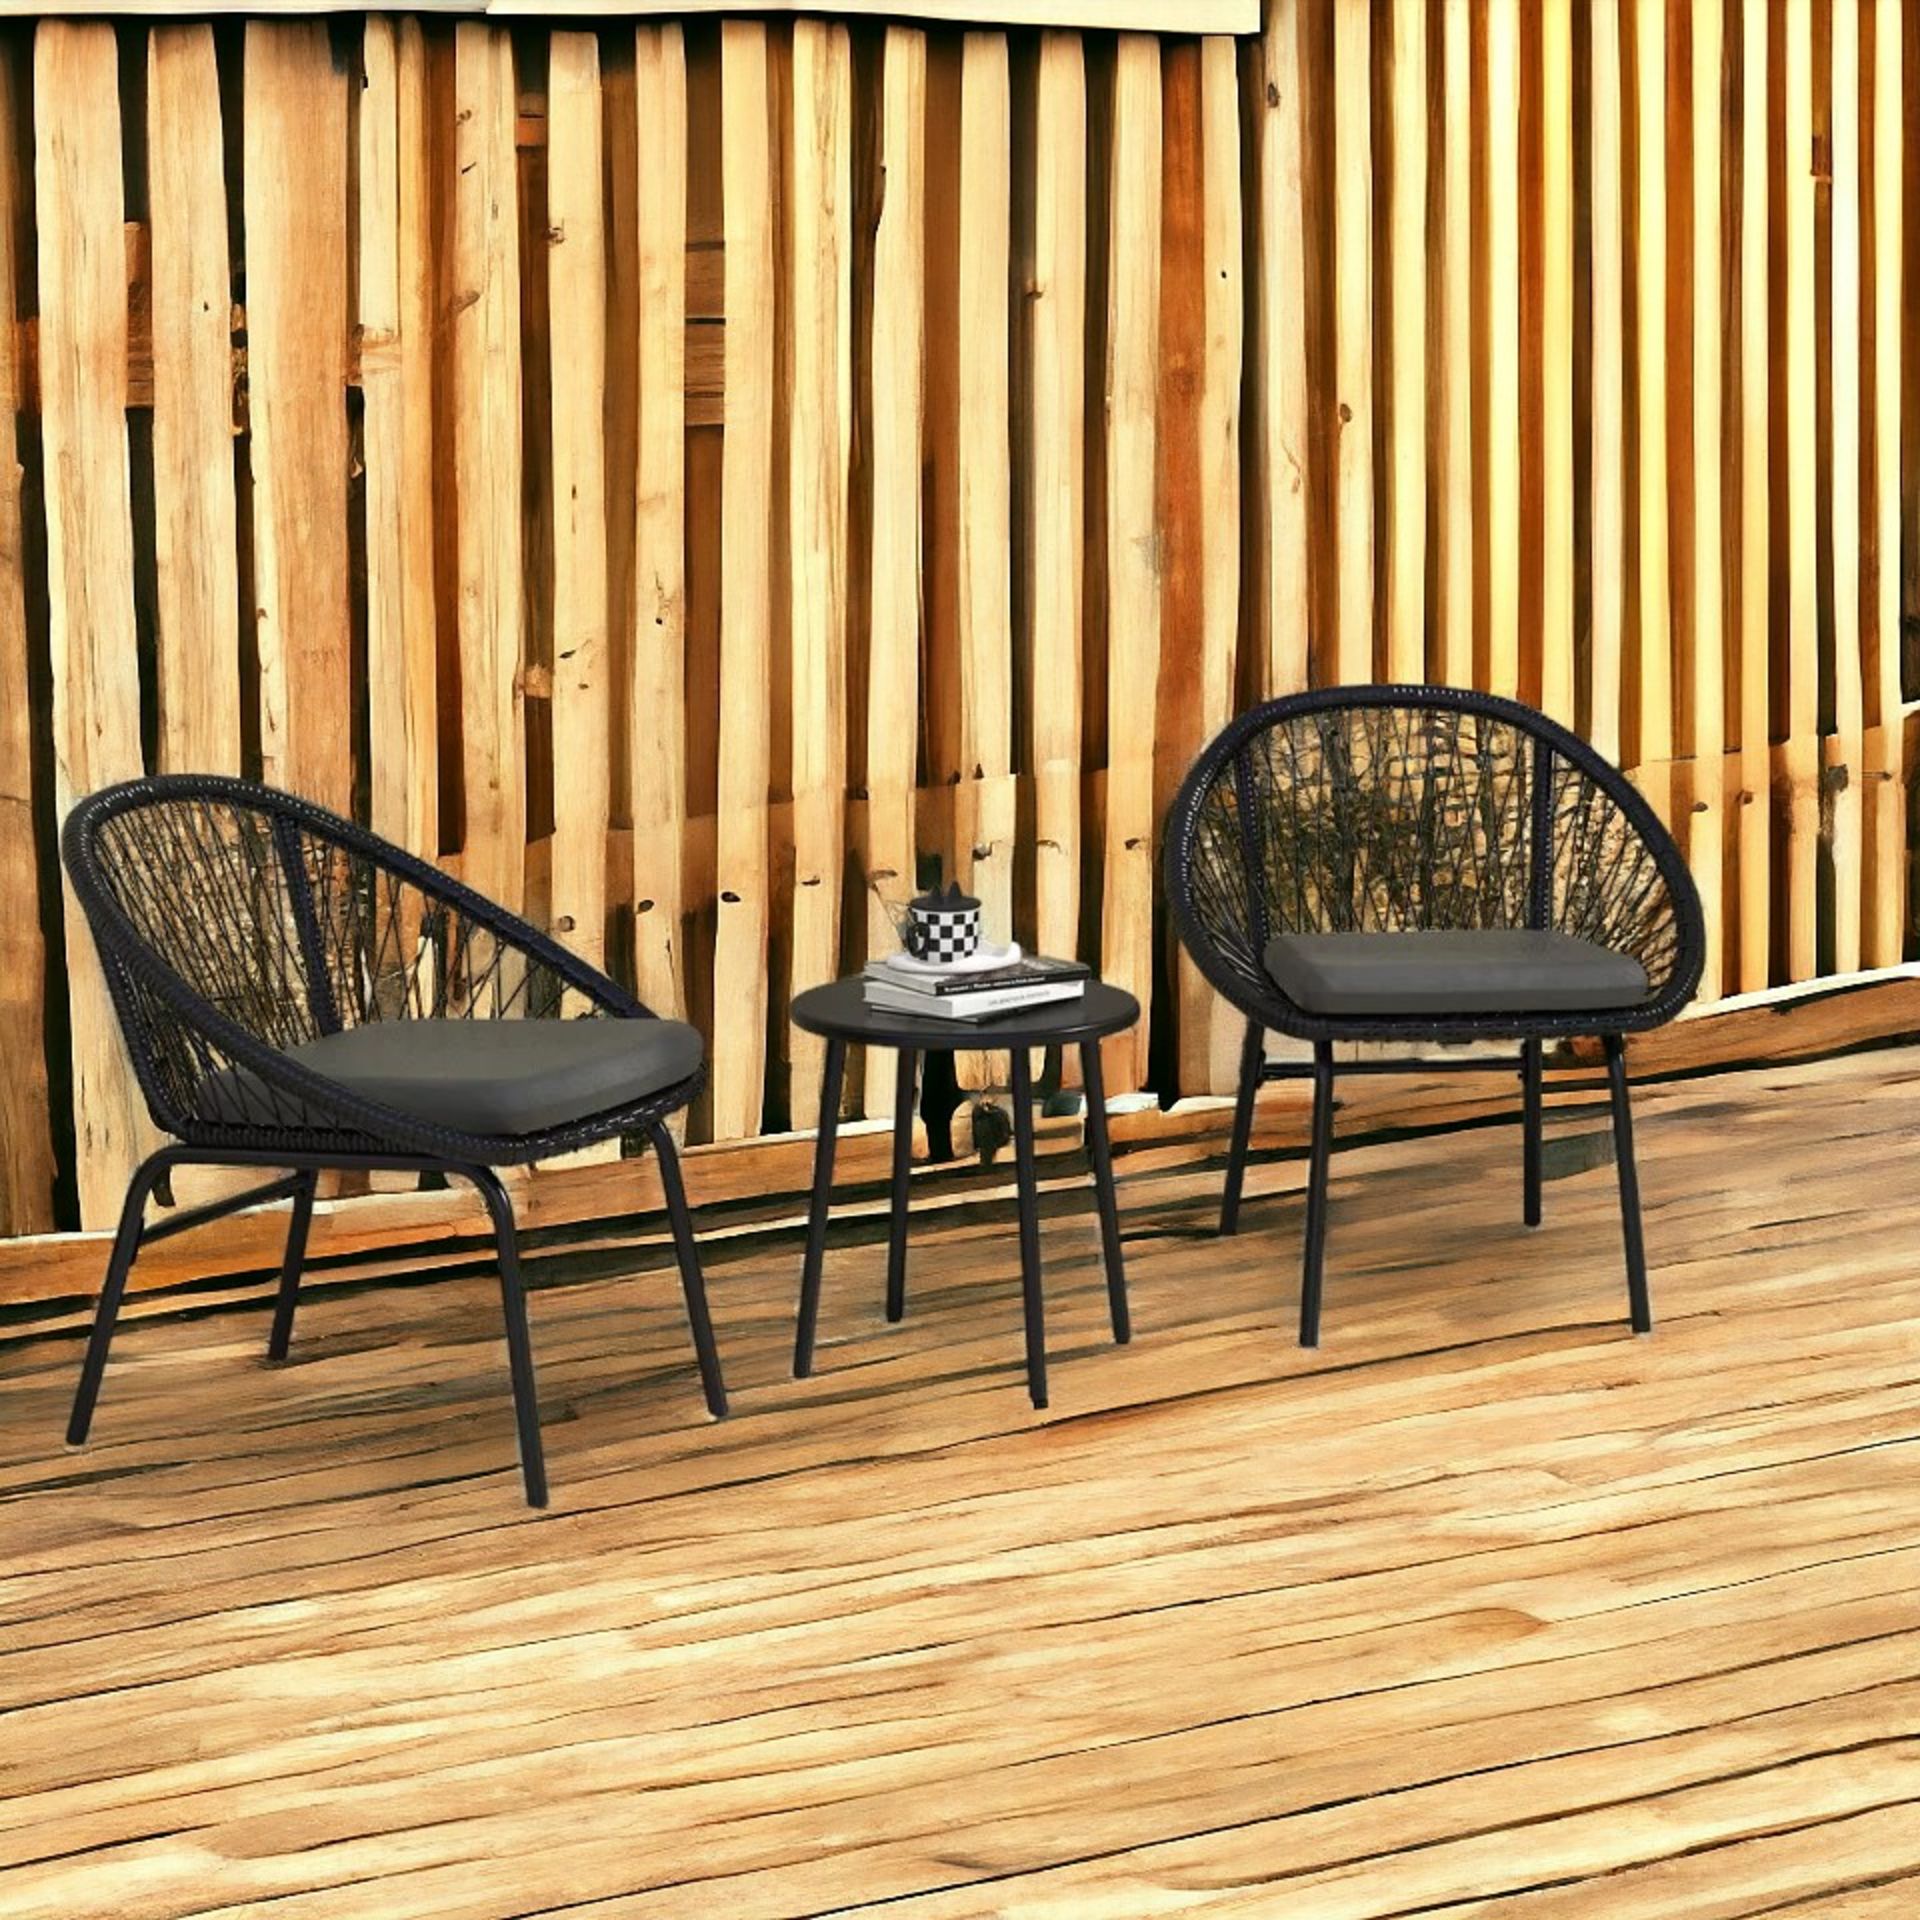 FREE DELIVERY - BRAND NEW 3 PIECE GARDEN FURNITURE SET, BISTRO SET W/ 2 CHAIRS & 1 COFFEE TABLE